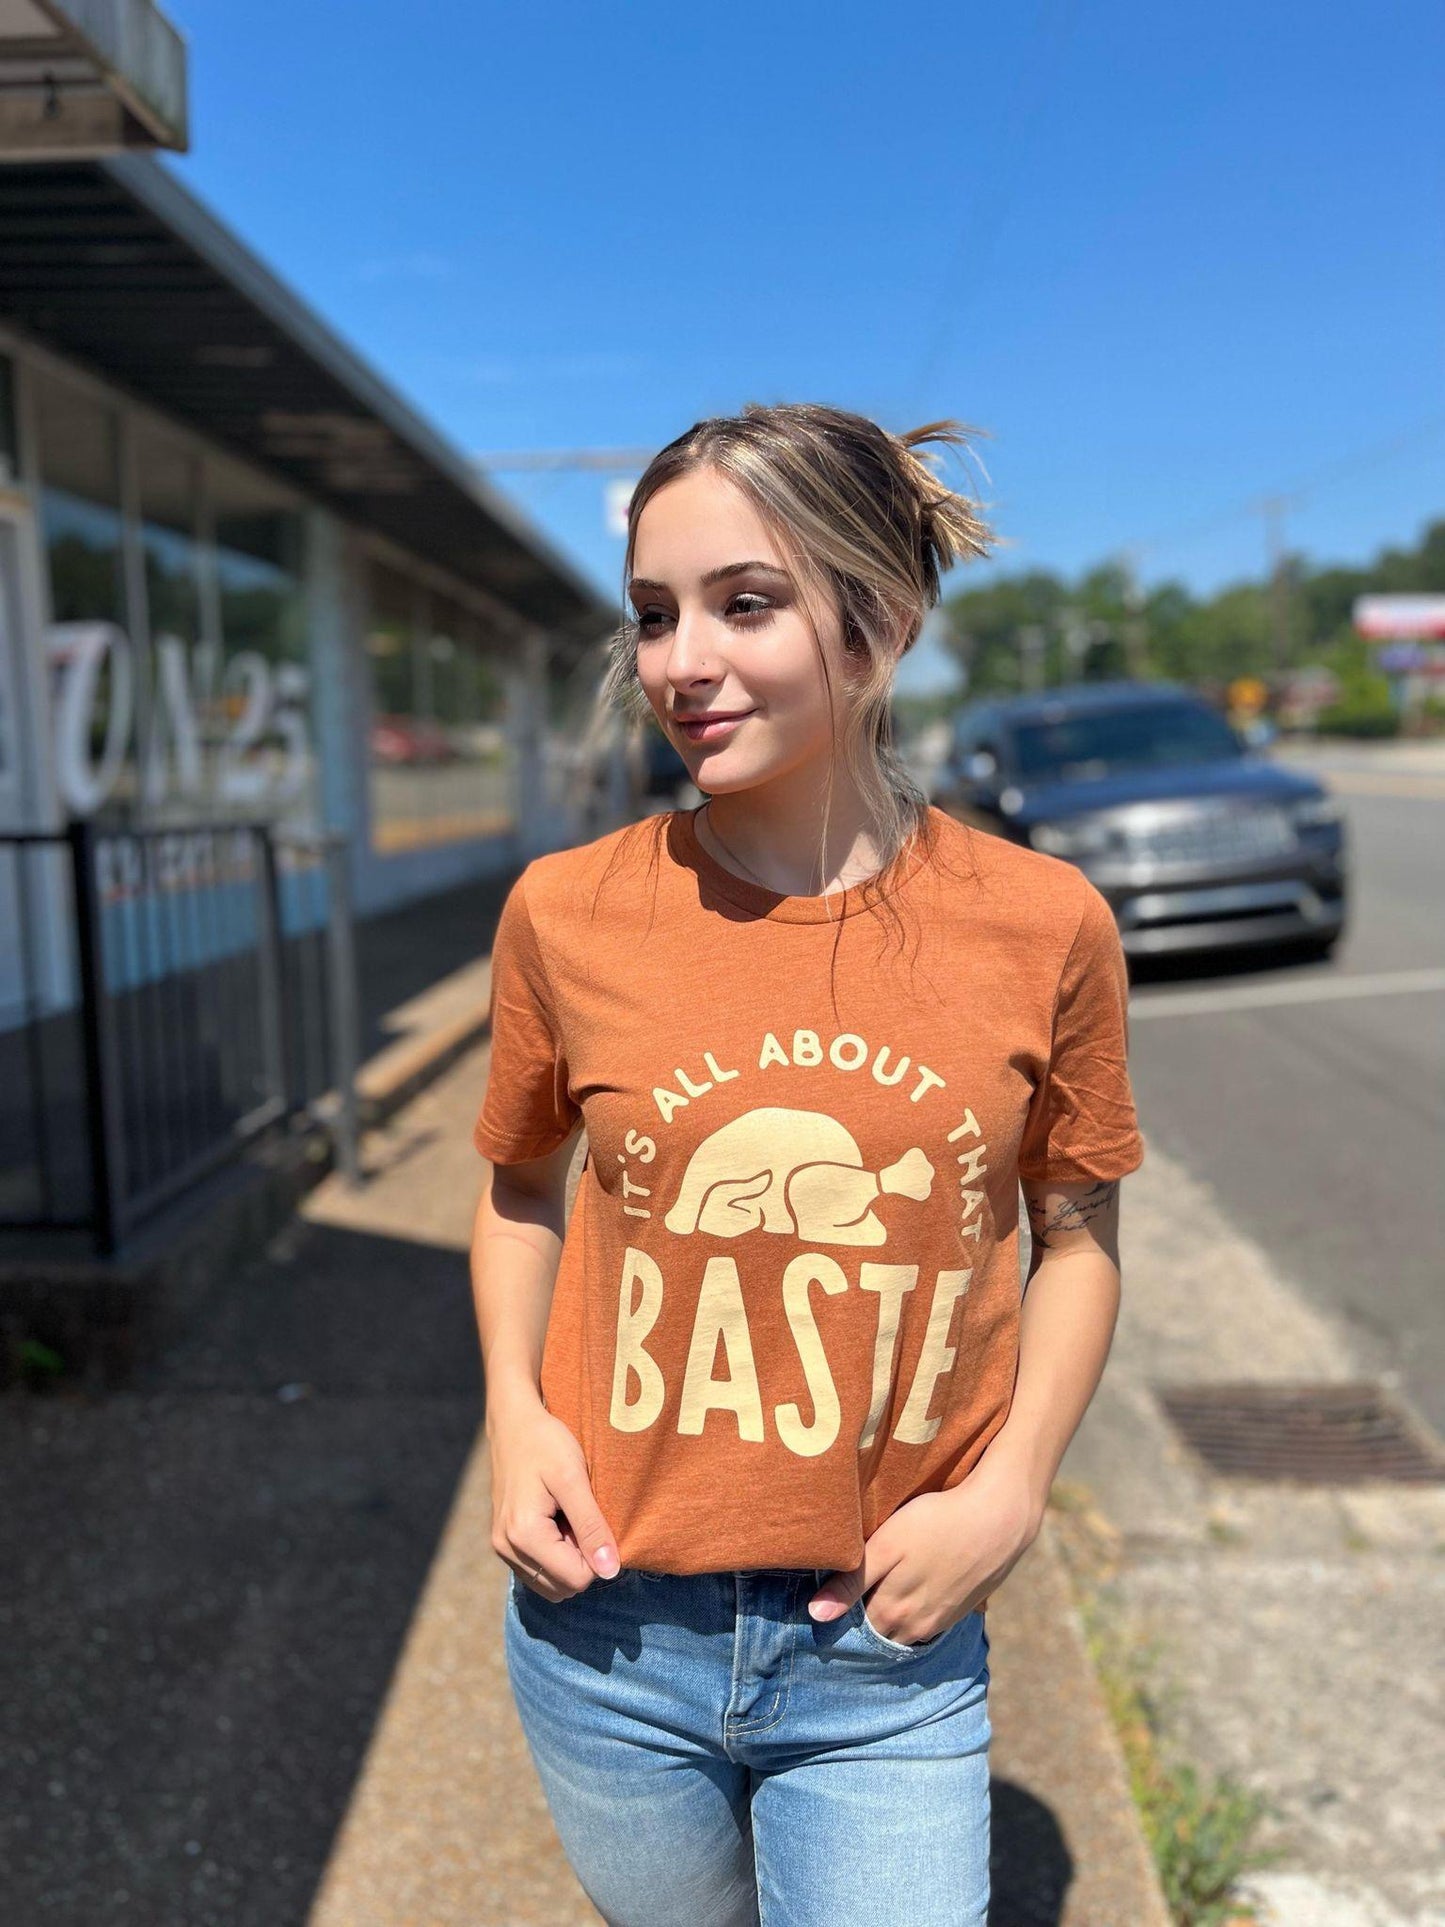 All About That Baste - ASK Apparel LLC